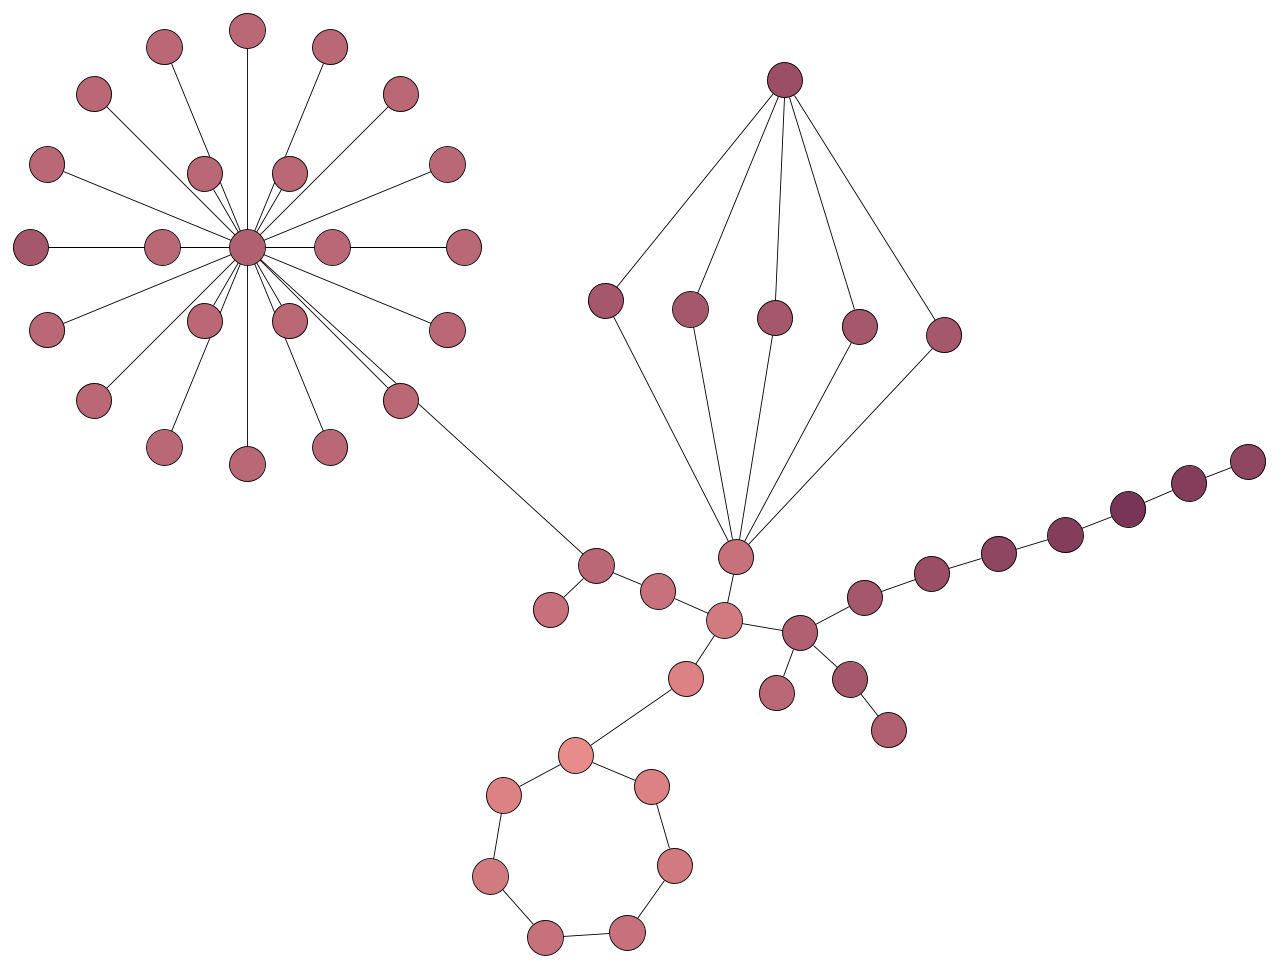 Force-Directed Graph Layout